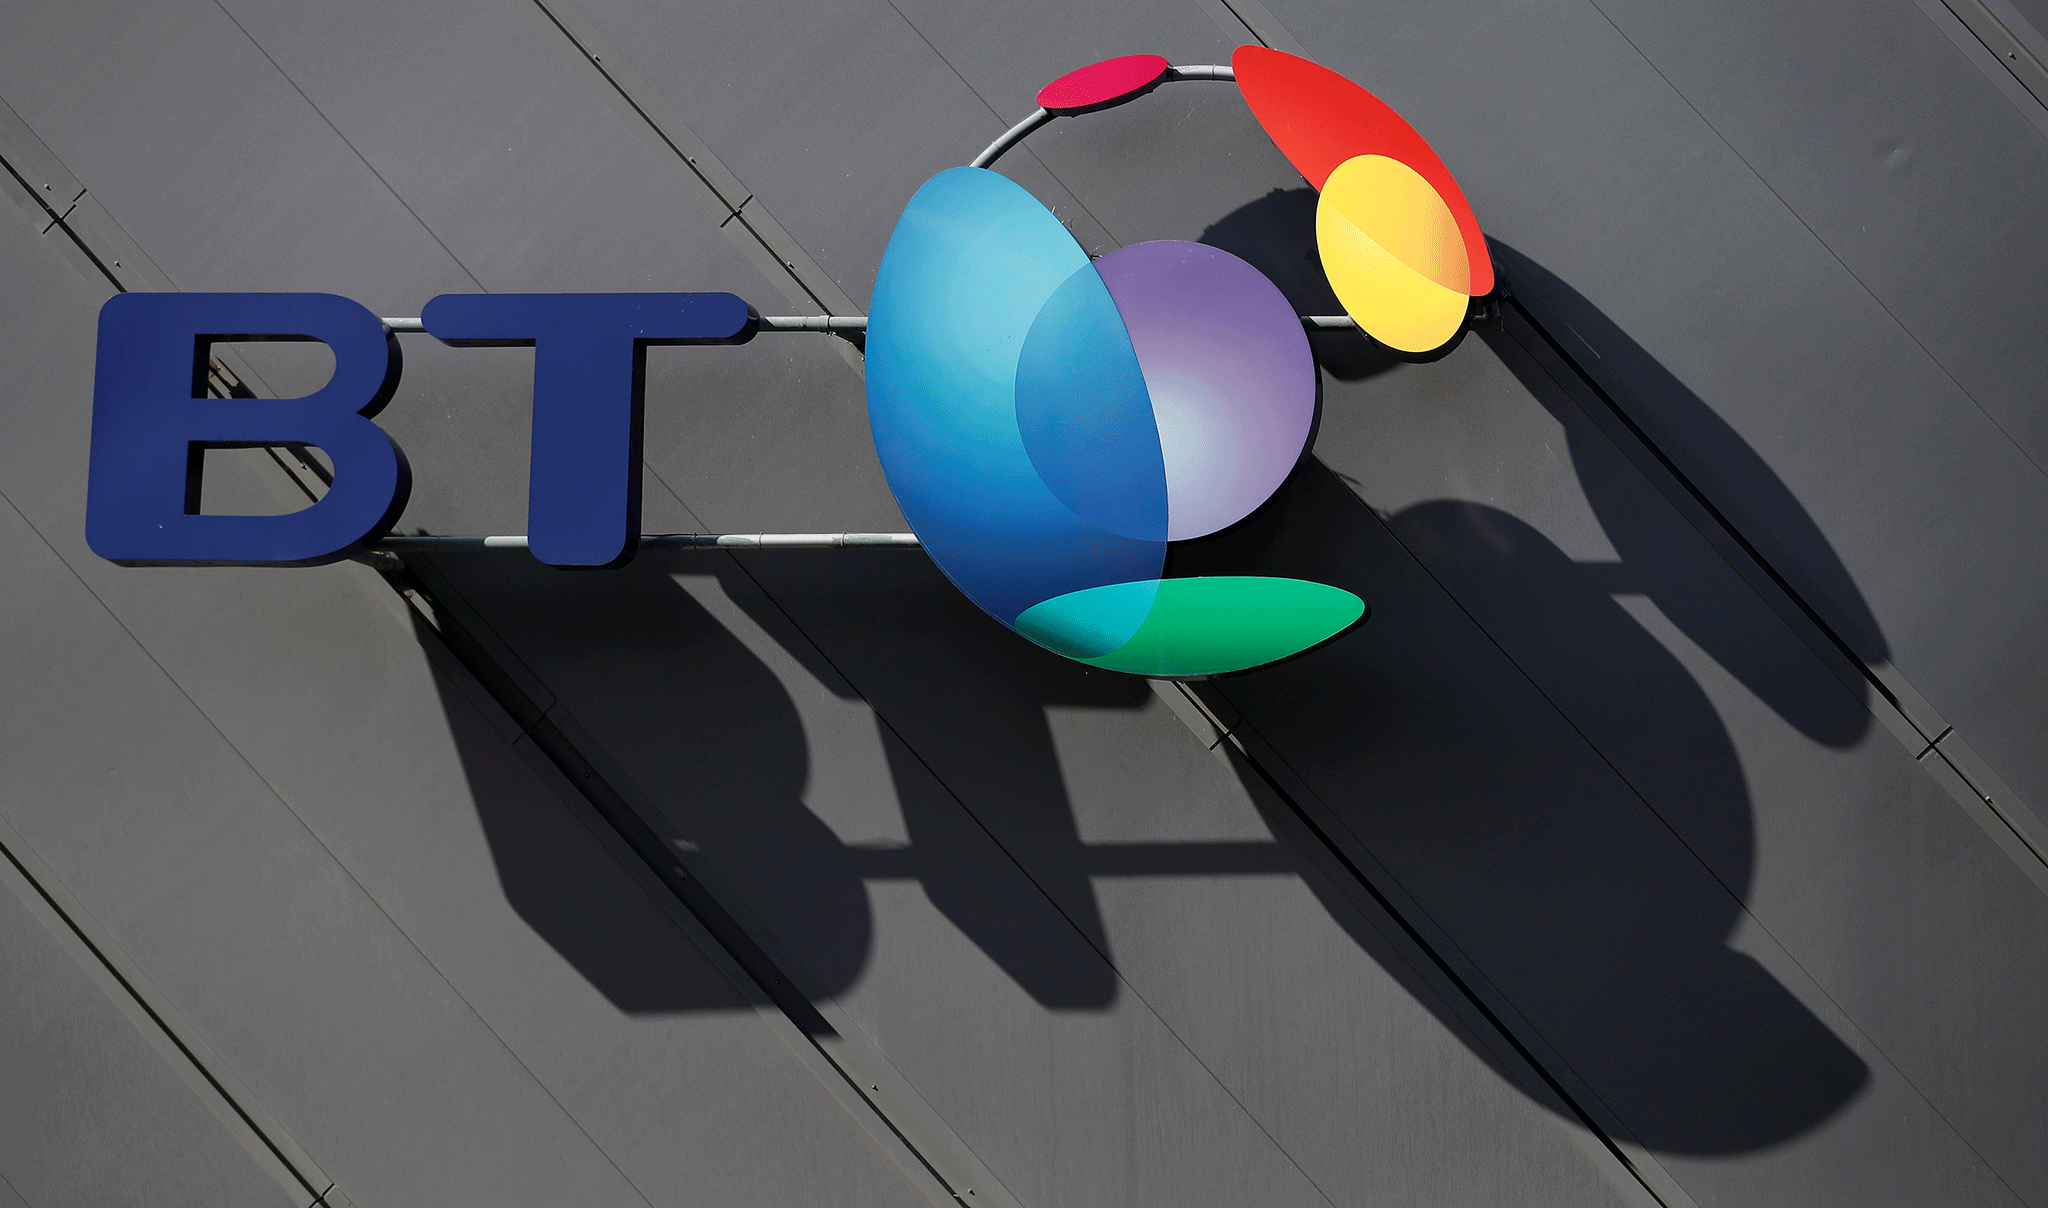 BT wrote down the value of its Italian business by £571m in January last year after uncovering improper accounting practices